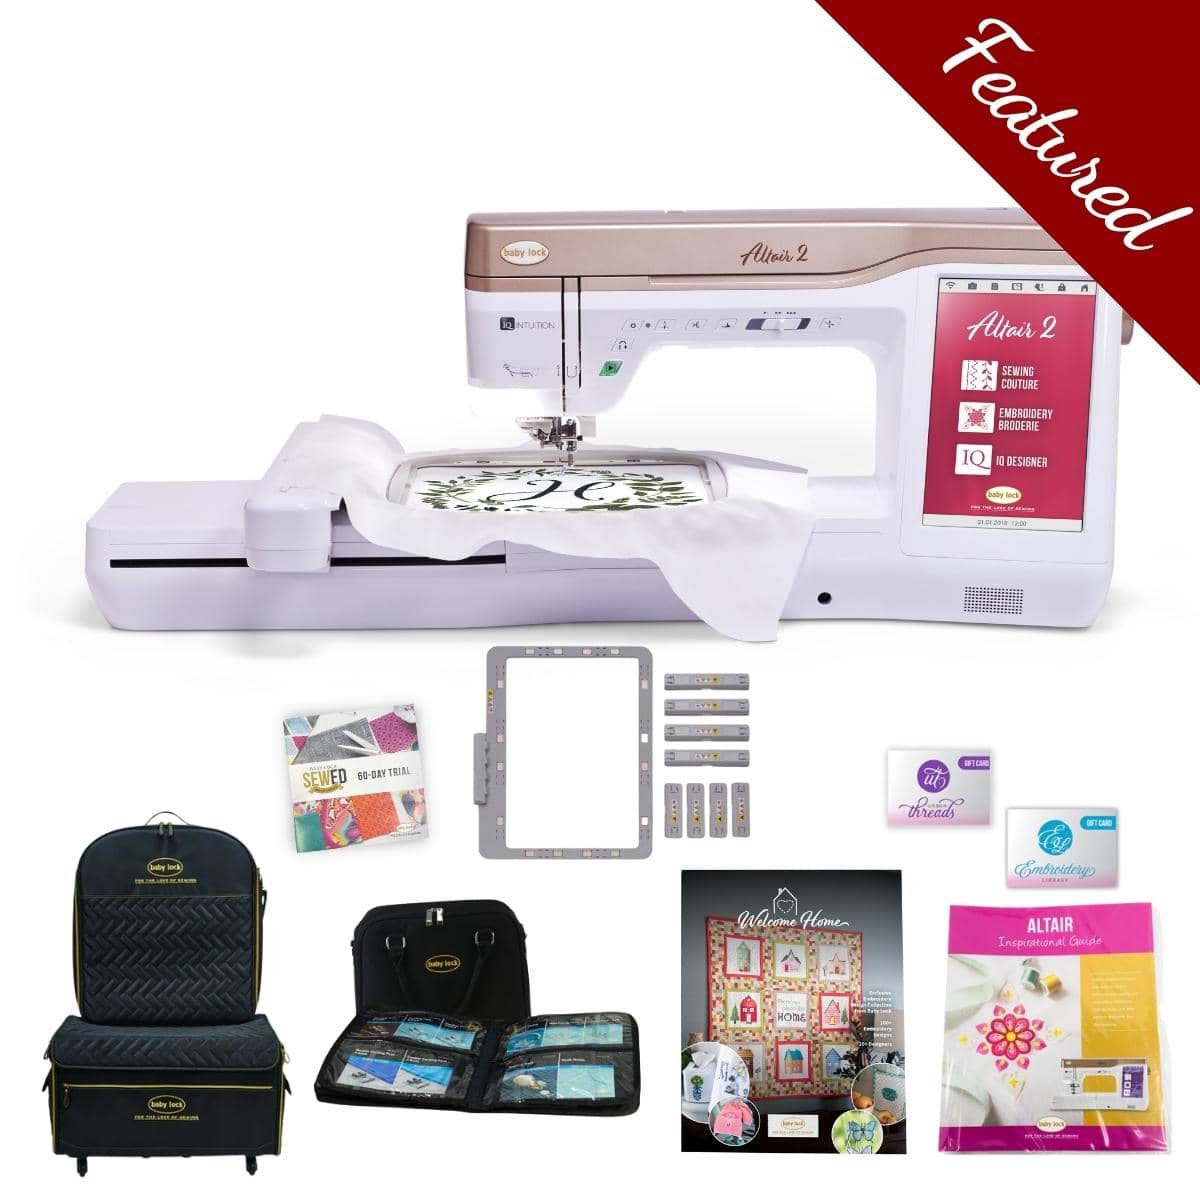 Baby Lock Vesta Sewing & Embroidery Machine : Sewing Parts Online